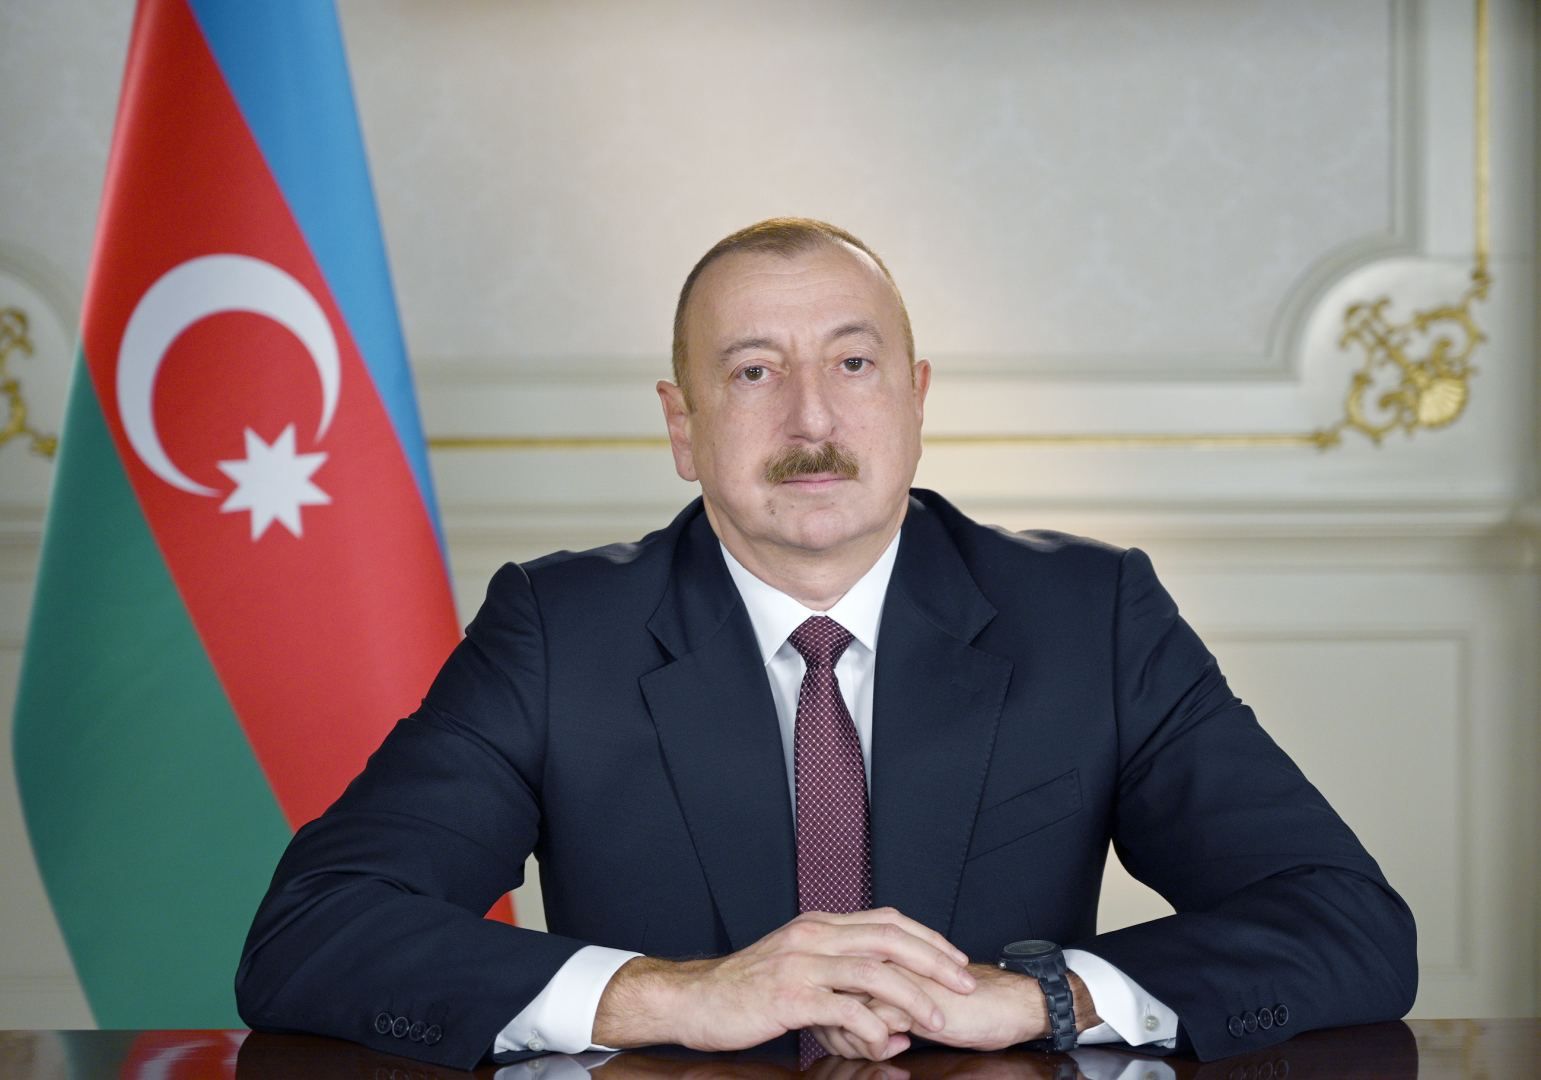 Azerbaijani President sends congratulatory letter to President of Georgia on Independence Day